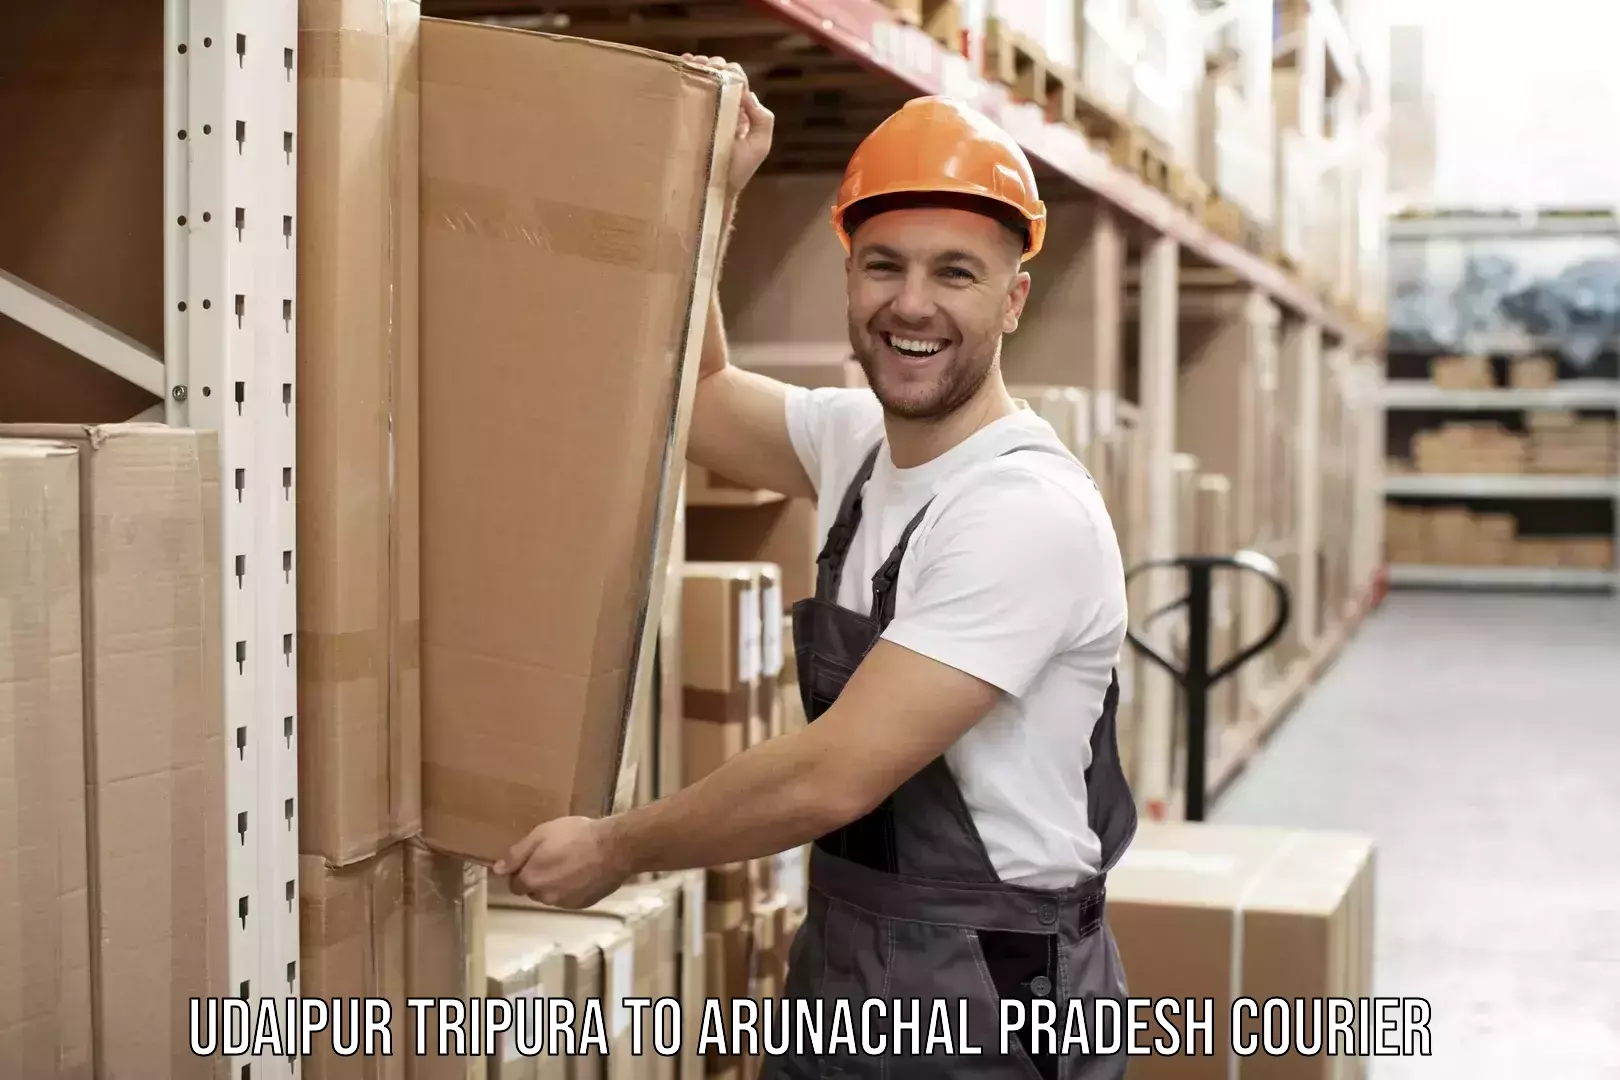 Efficient moving company in Udaipur Tripura to Nirjuli